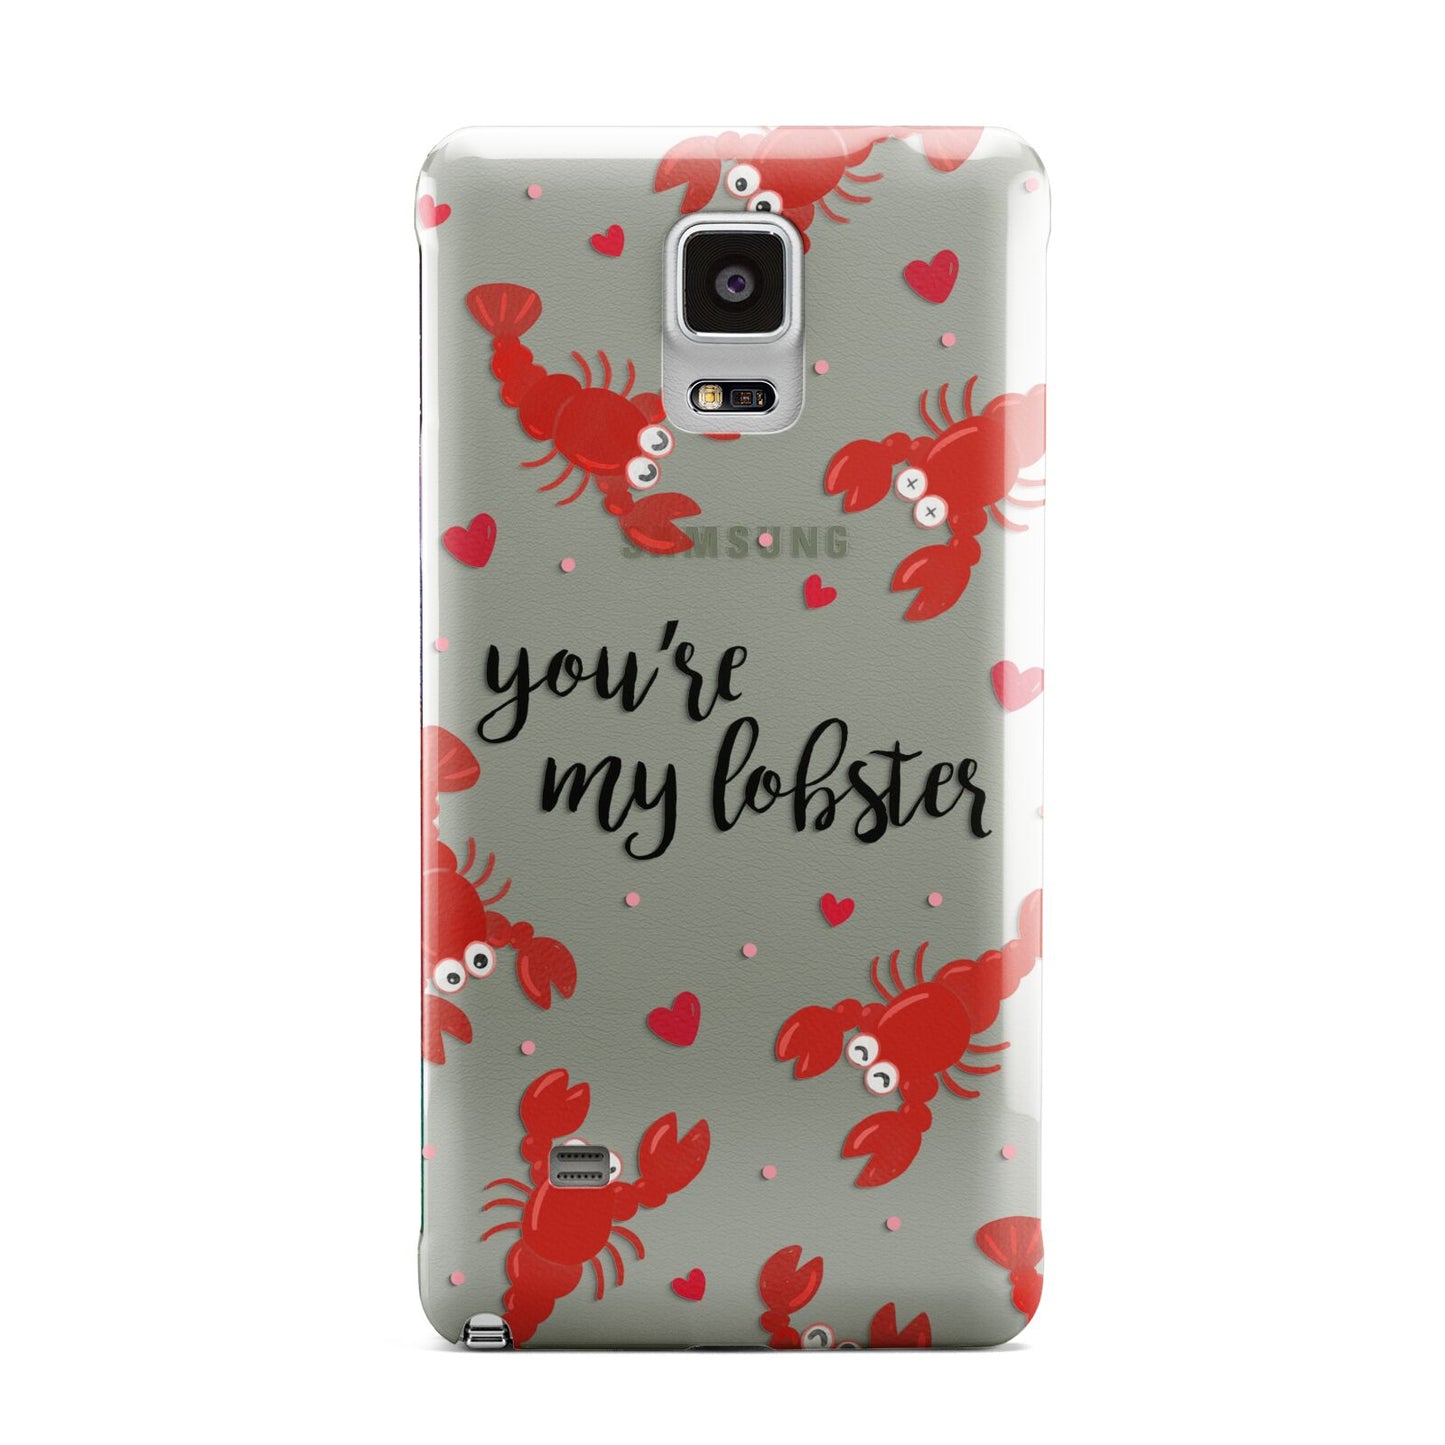 Youre My Lobster Samsung Galaxy Note 4 Case